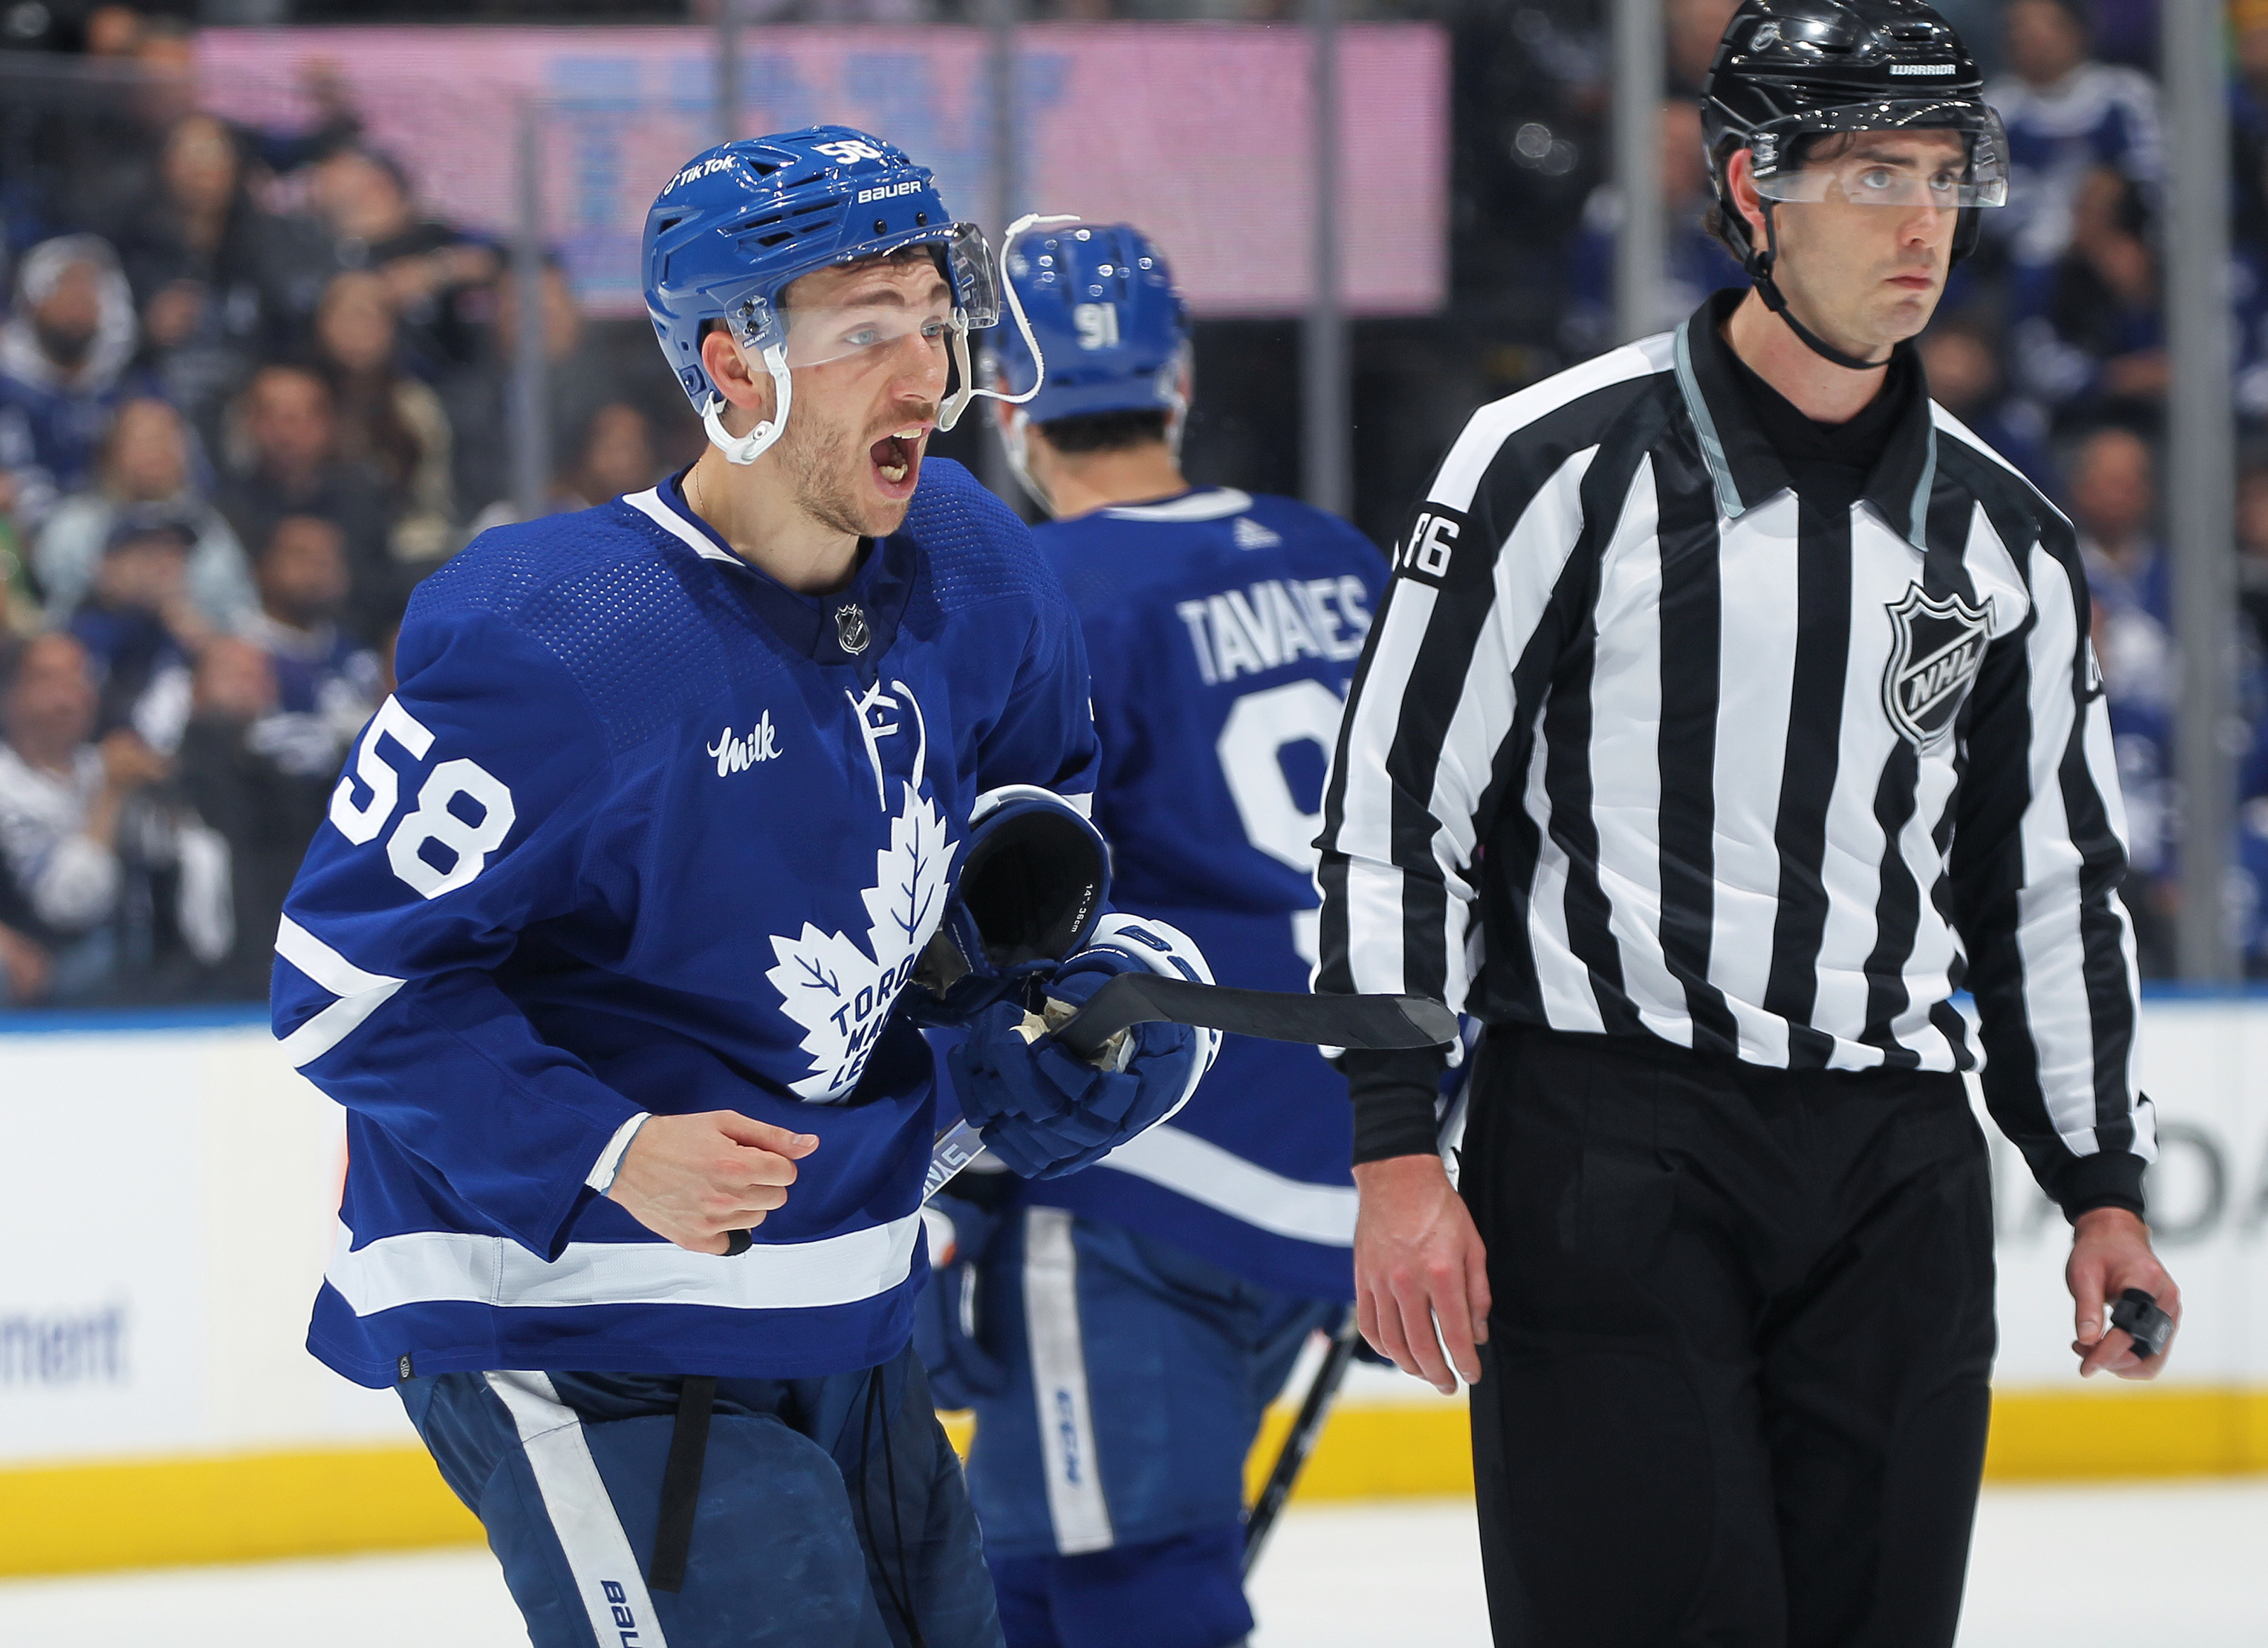 O'Reilly scores on Maple Leafs after puck bounces off ref 